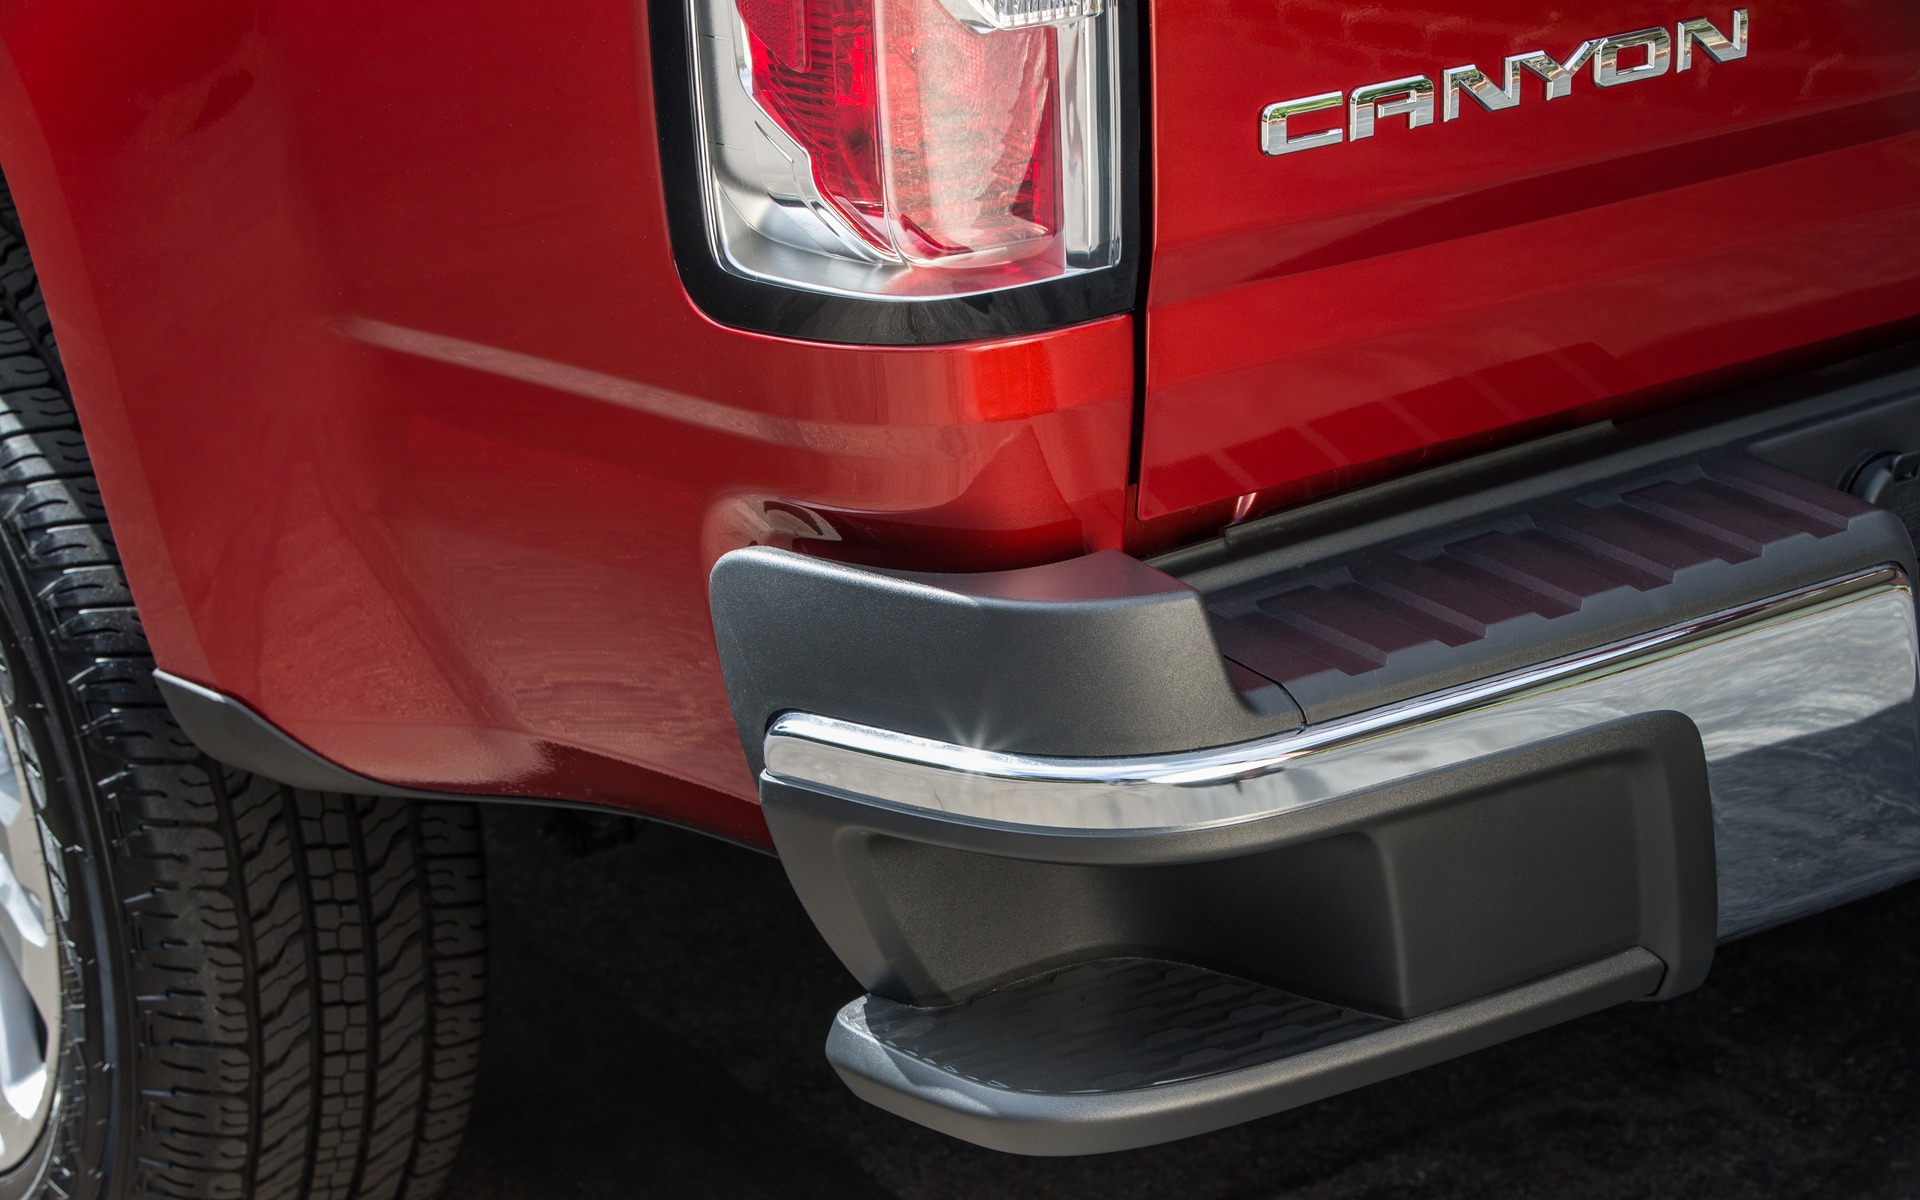 A notch at the end of the bumper makes it easier to access the cargo box.